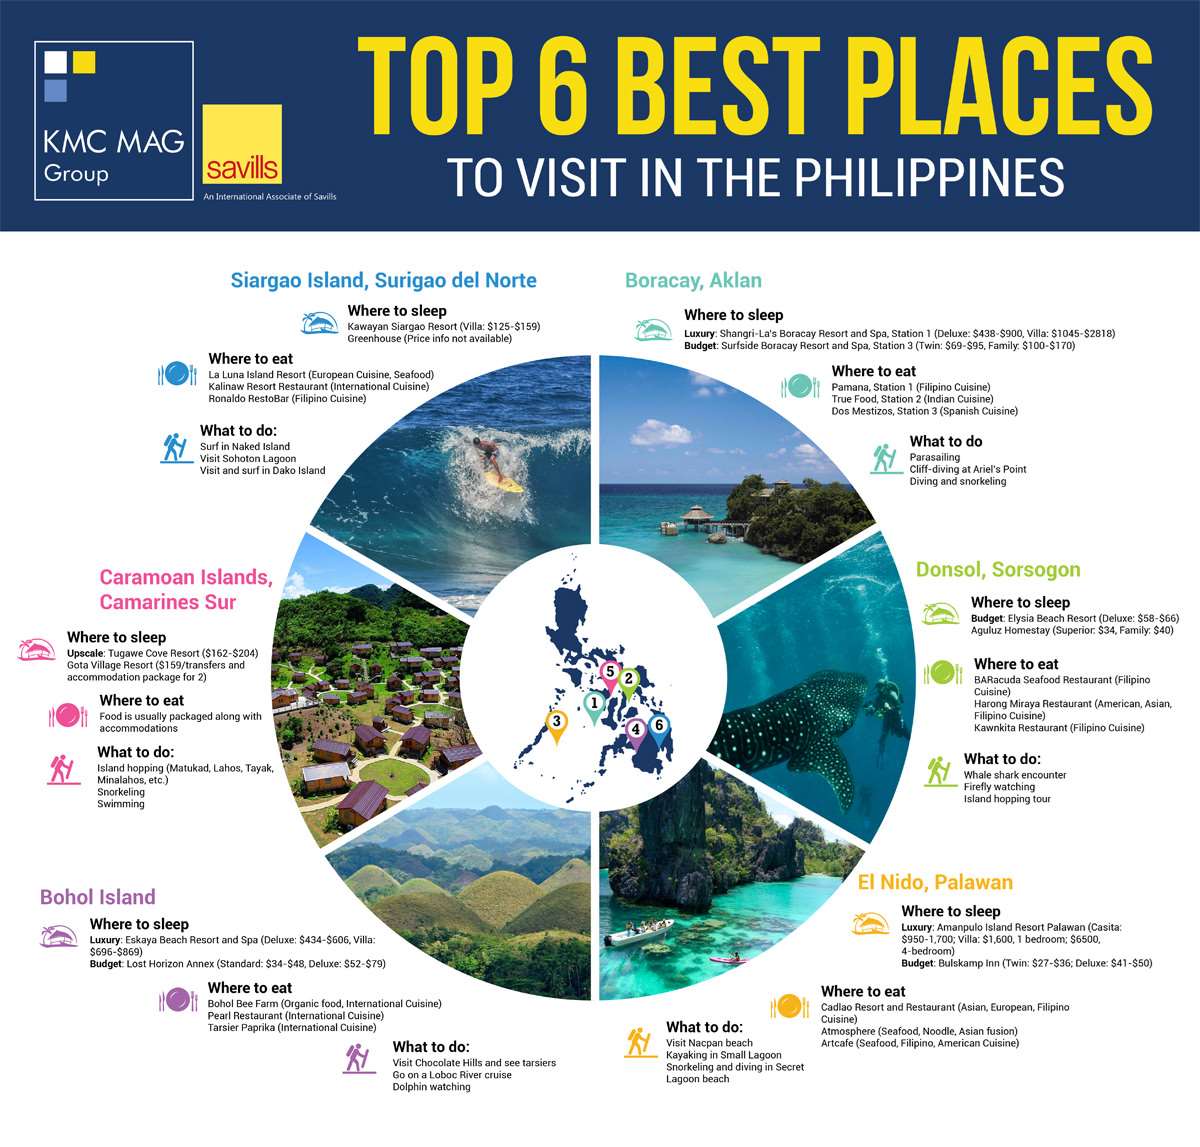 local tourism organization in the philippines